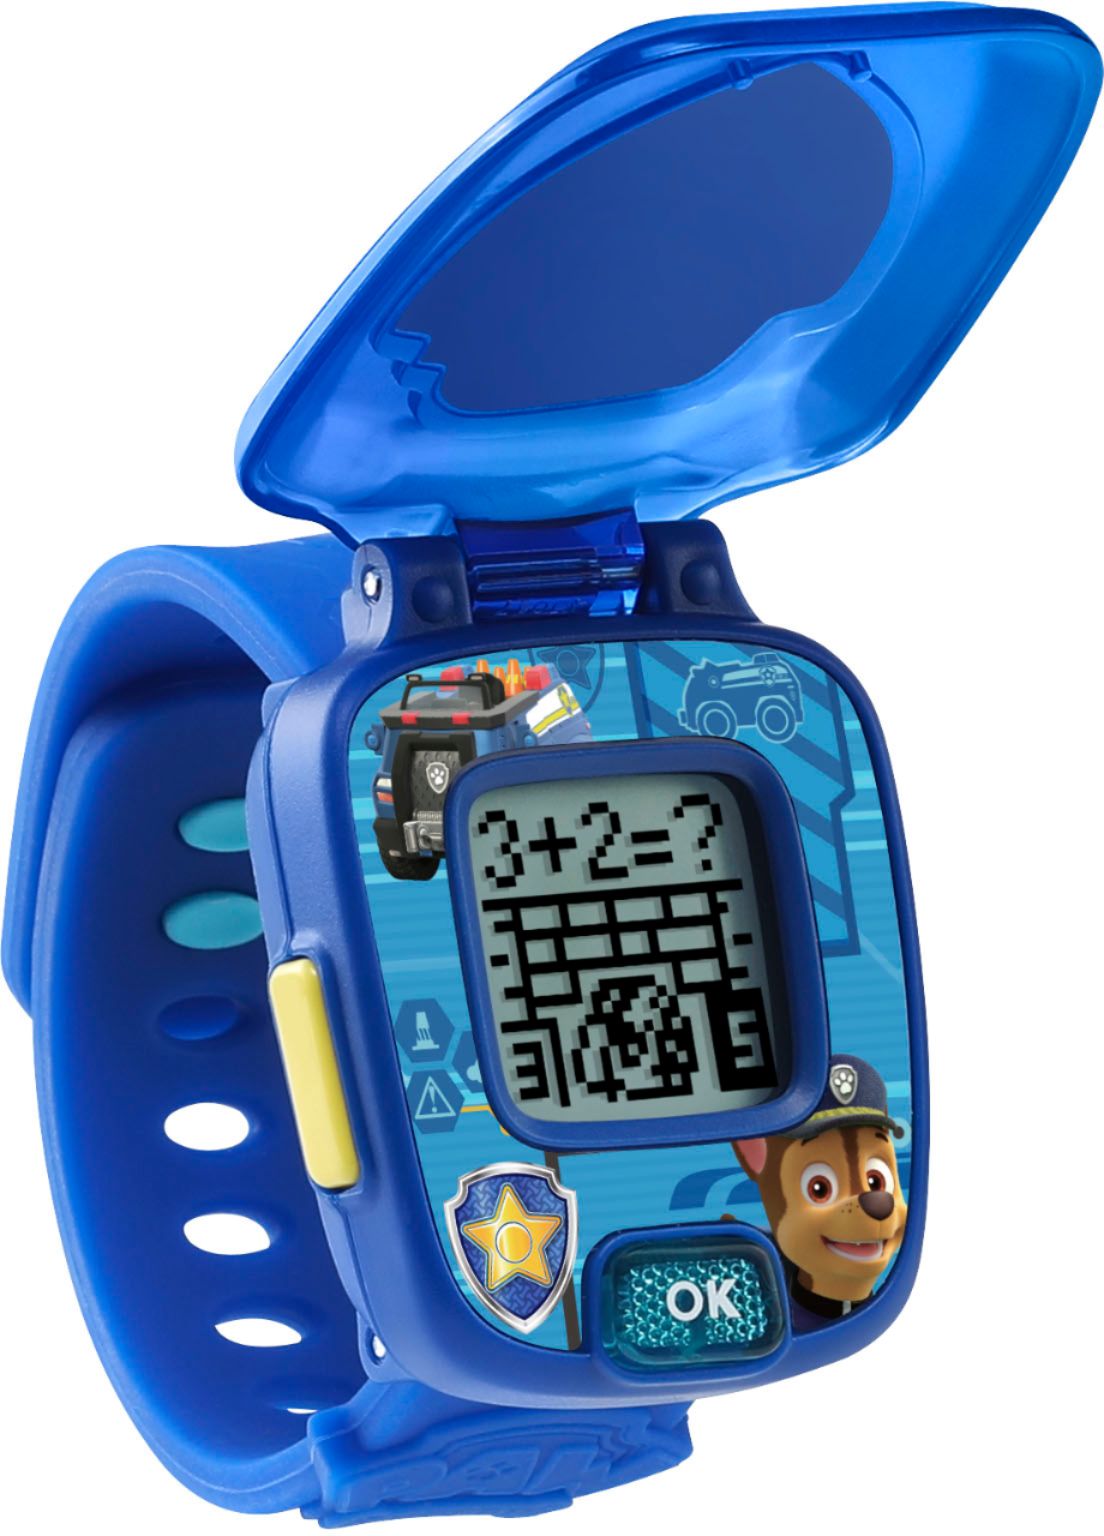 Angle View: VTech - PAW Patrol Chase Learning Watch - Blue